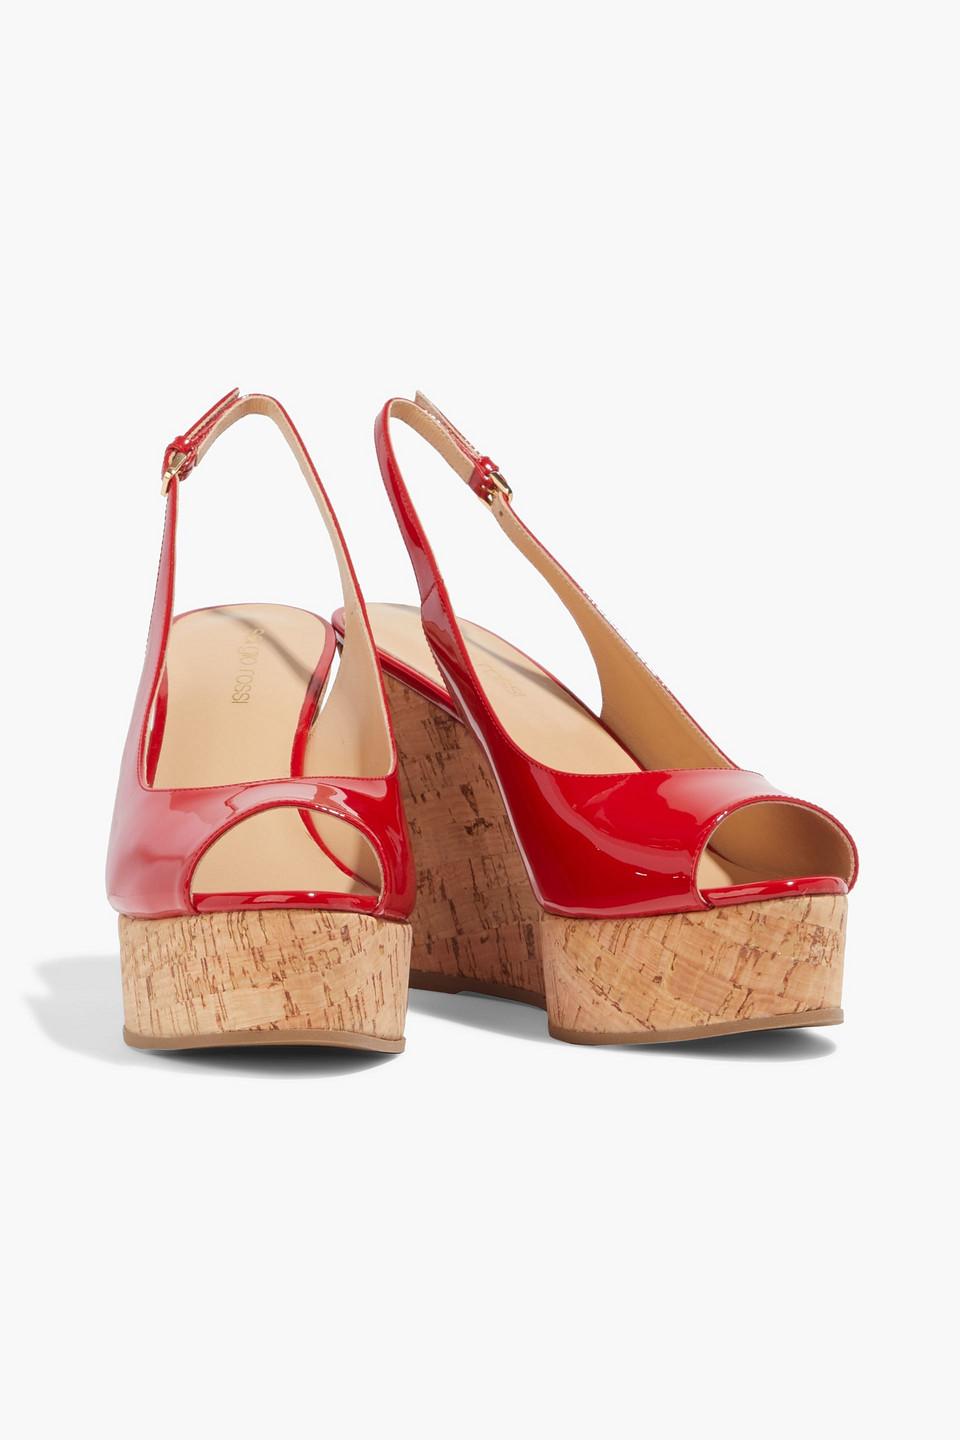 Marc by Marc Jacobs Red Patent Leather Strappy Slingback Cork Wedge Sandals